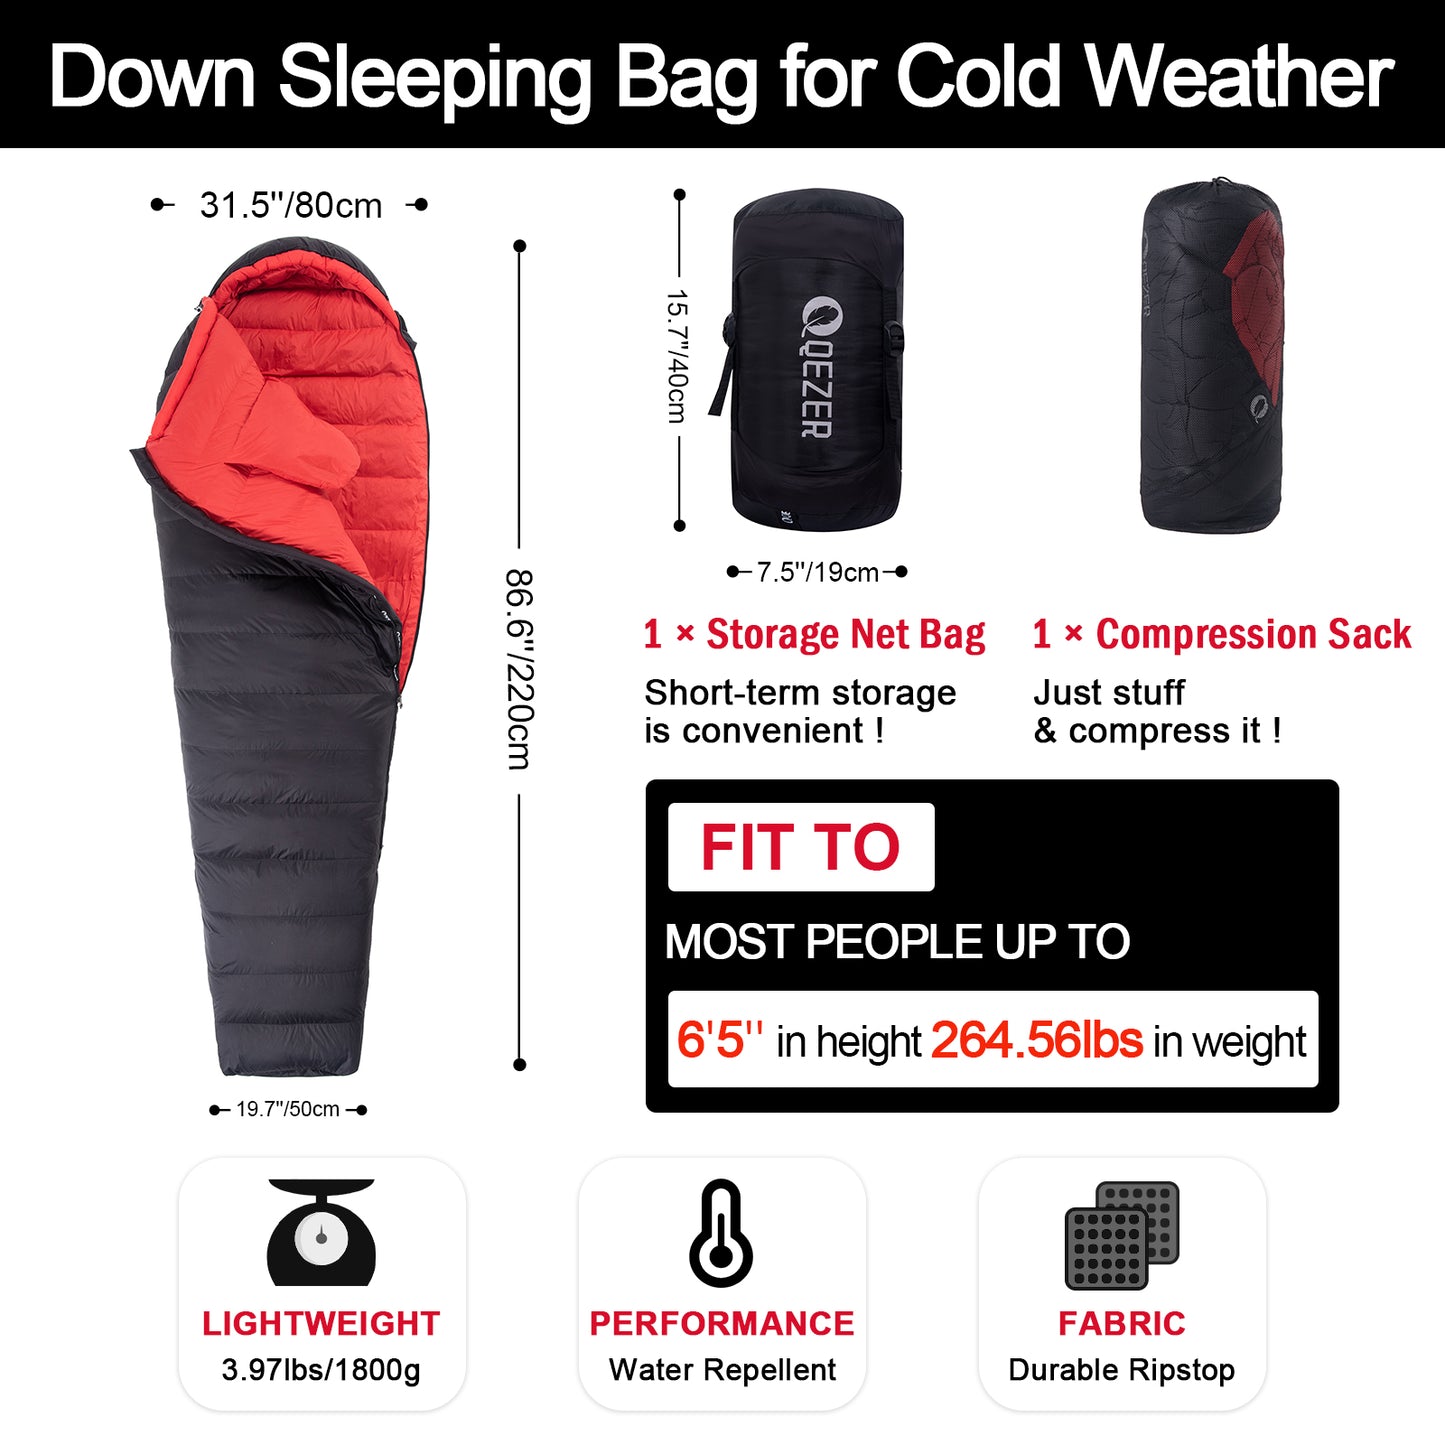 QEZER Down Sleeping Bag for Adults, -12 Degree C Winter Sleeping Bag for Camping, Hiking and Backpacking Outdoor